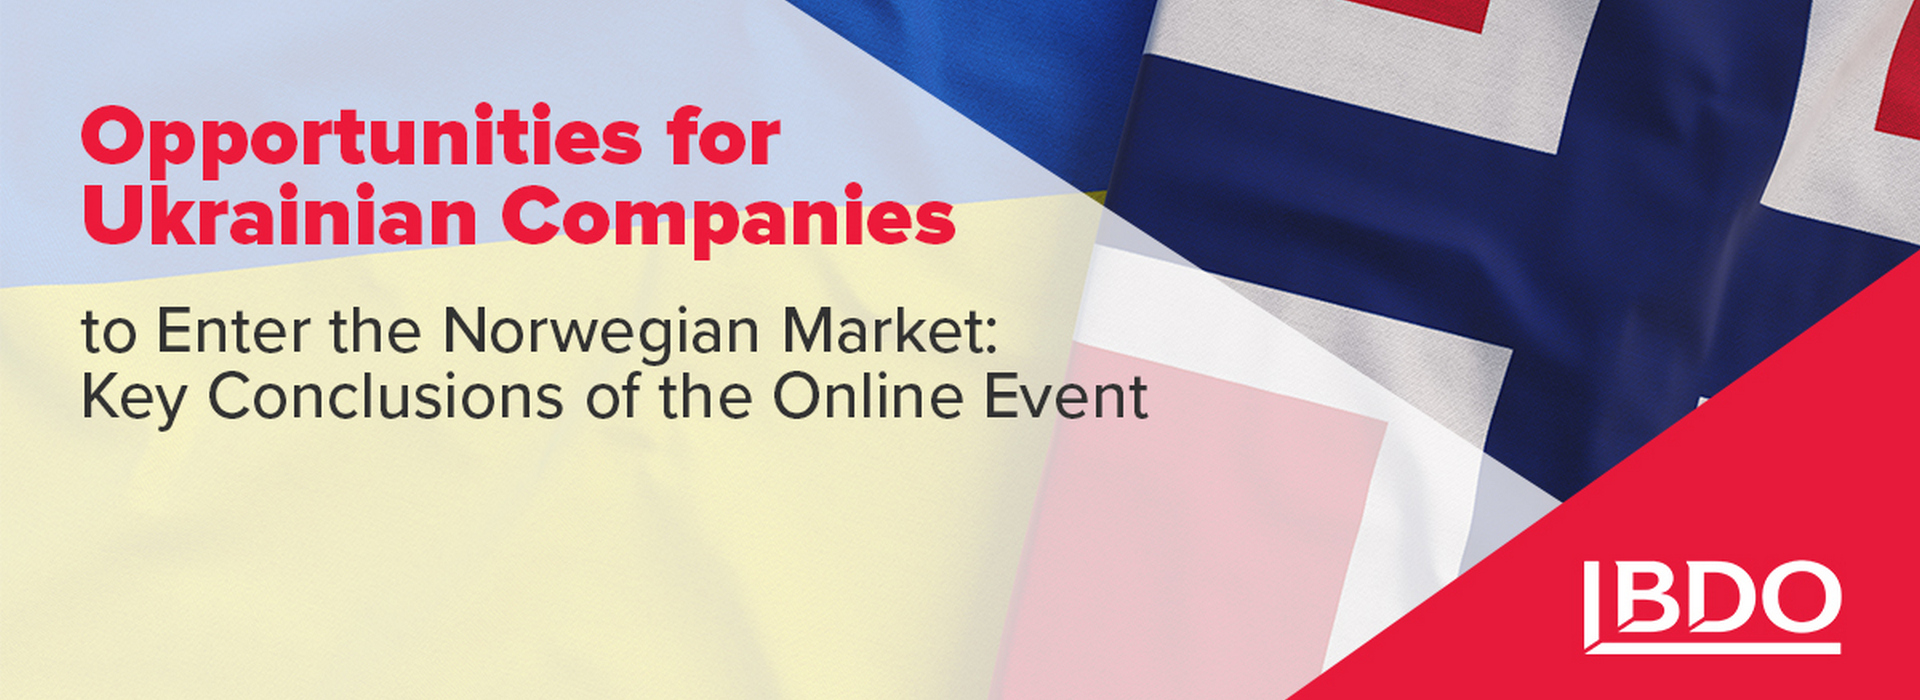 Key Conclusions of the Event Regarding Opportunities for Ukrainian Companies to Enter the Norwegian Market